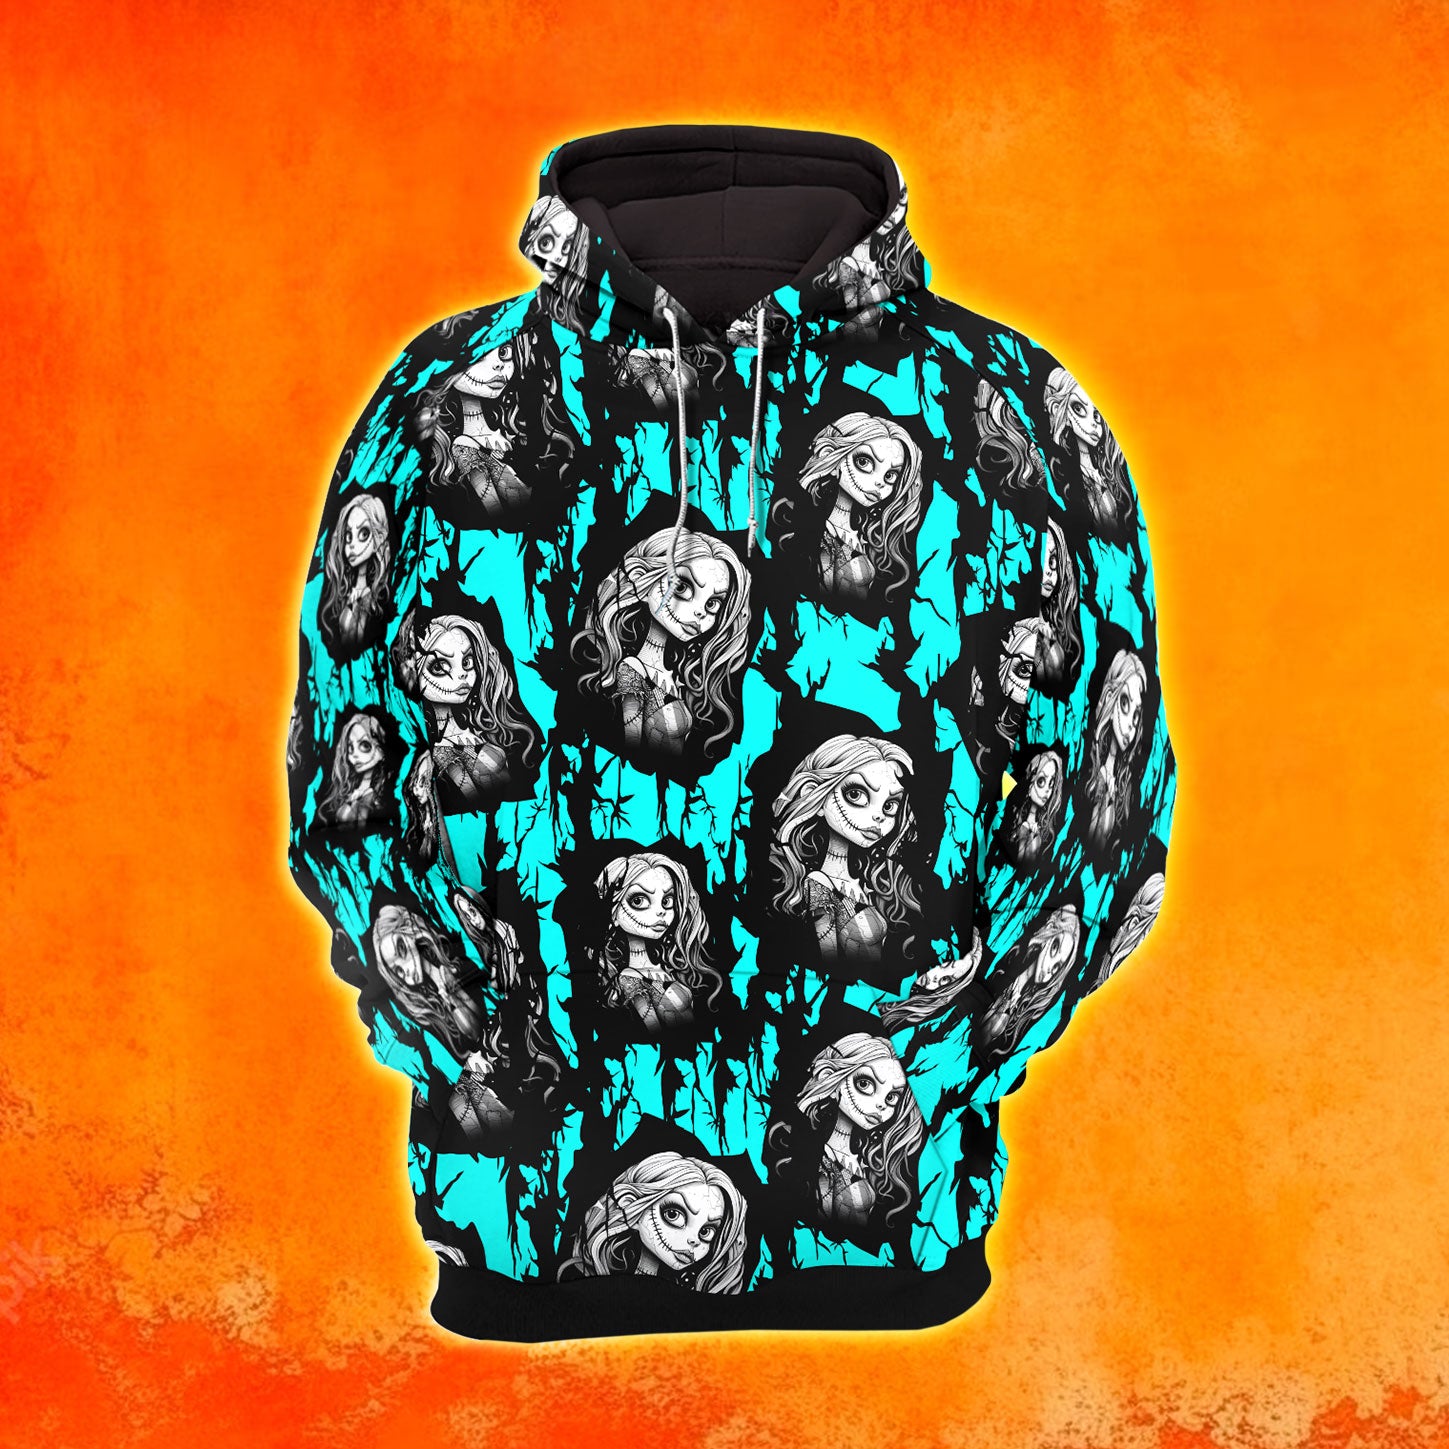 Cyan Nightmare Art Combo Hoodie and Leggings - Dark and edgy matching set with skull designs for a unique and stylish look